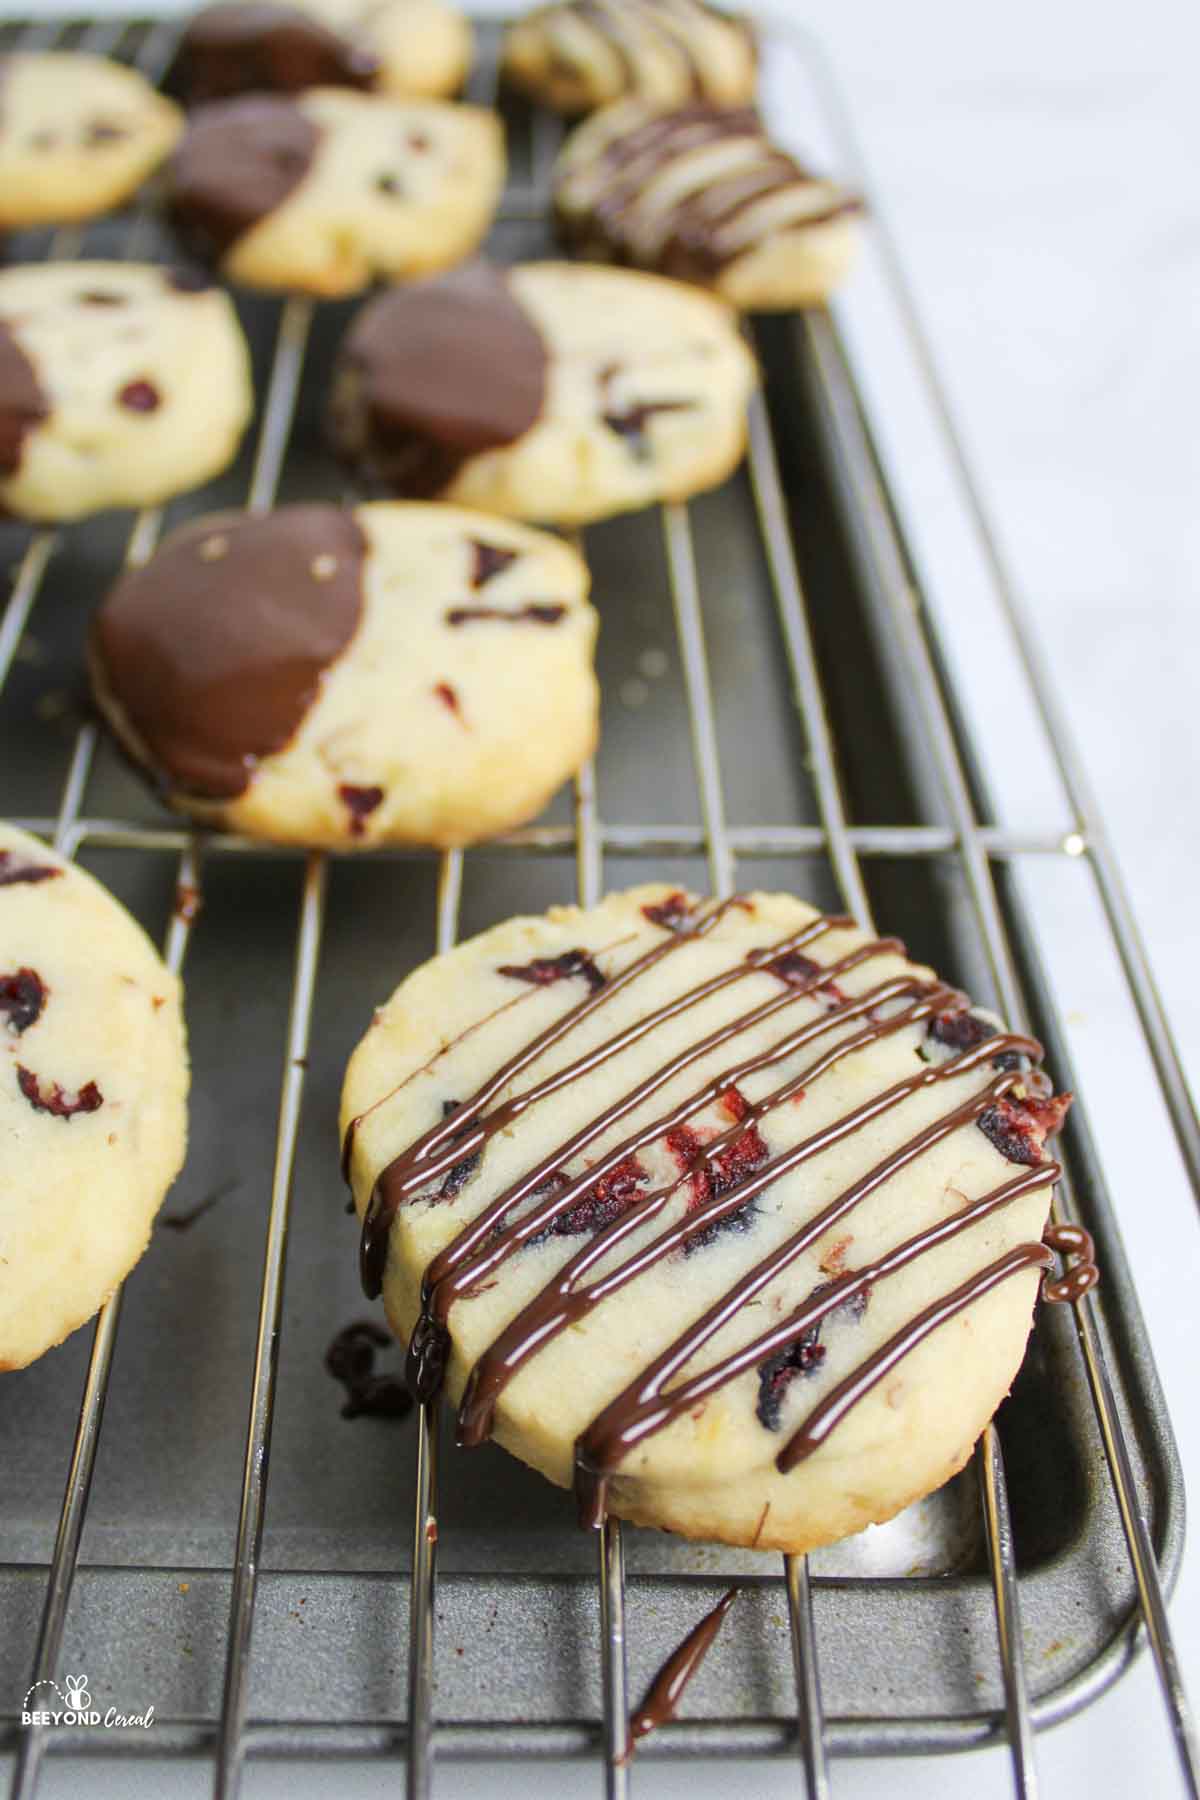 chocolate dipped and drizzled shortbread cookies on wire rack over cookiesheet